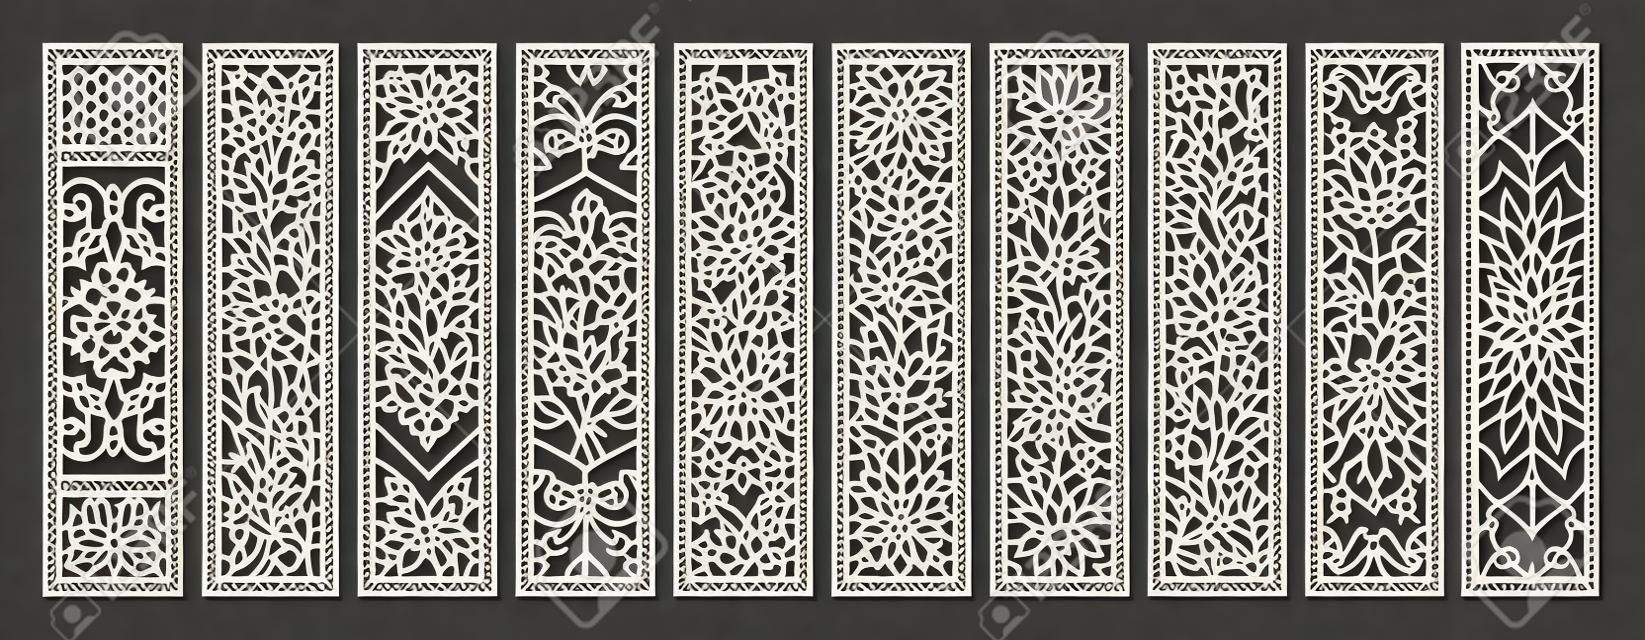 Set of vertical rectangular panels, lattice, bookmark. Decorative elements with a floral pattern. Template for plotter laser cutting of paper, metal engraving, wood carving, cnc. vector illustration.